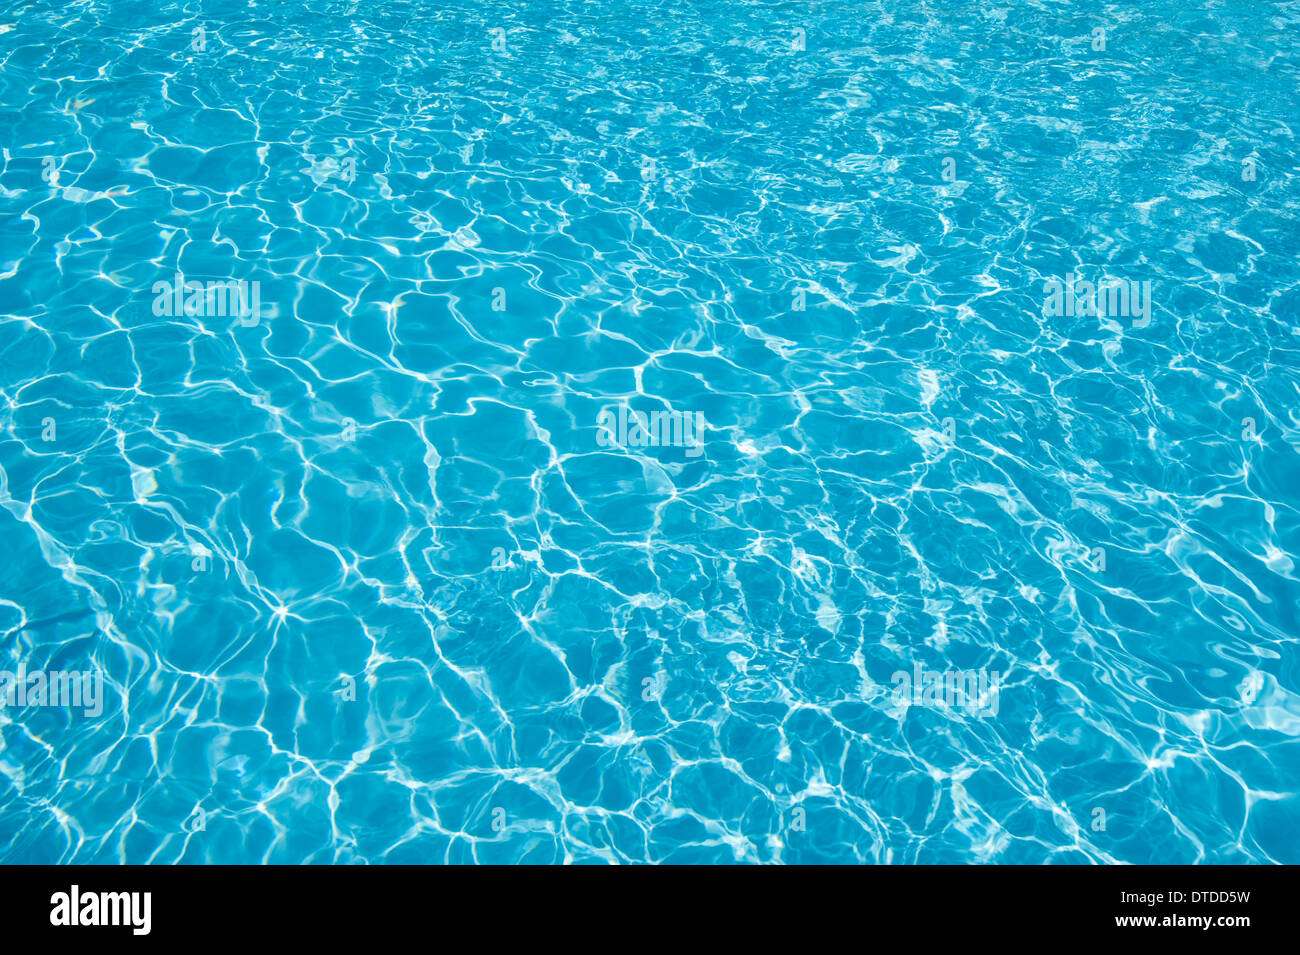 Rippling water effects with refraction in a tropical hotel swimming pool abstract background Stock Photo